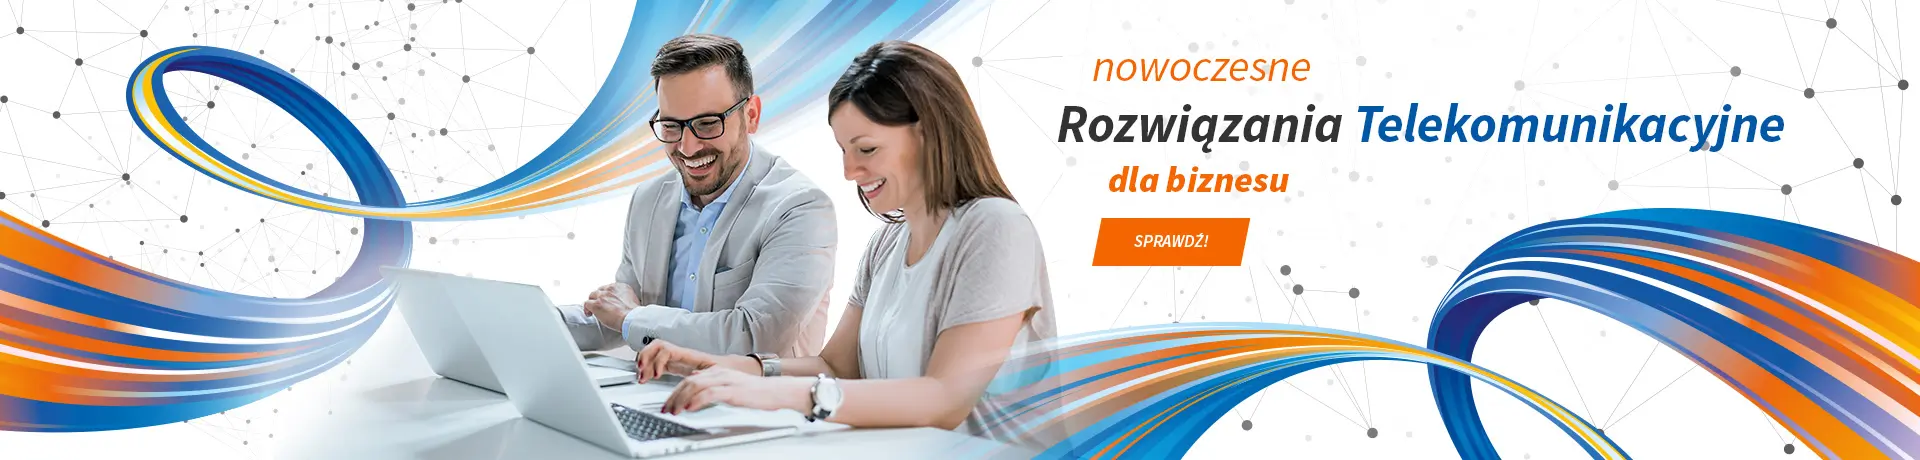 A professional man and woman collaborating on a laptop with 'modern Telecommunication Solutions for business' in Polish and a 'CHECK!' call to action, against a backdrop of dynamic blue and orange ribbons and a network-inspired graphic design, suggesting innovation and connectivity in business telecommunication services.